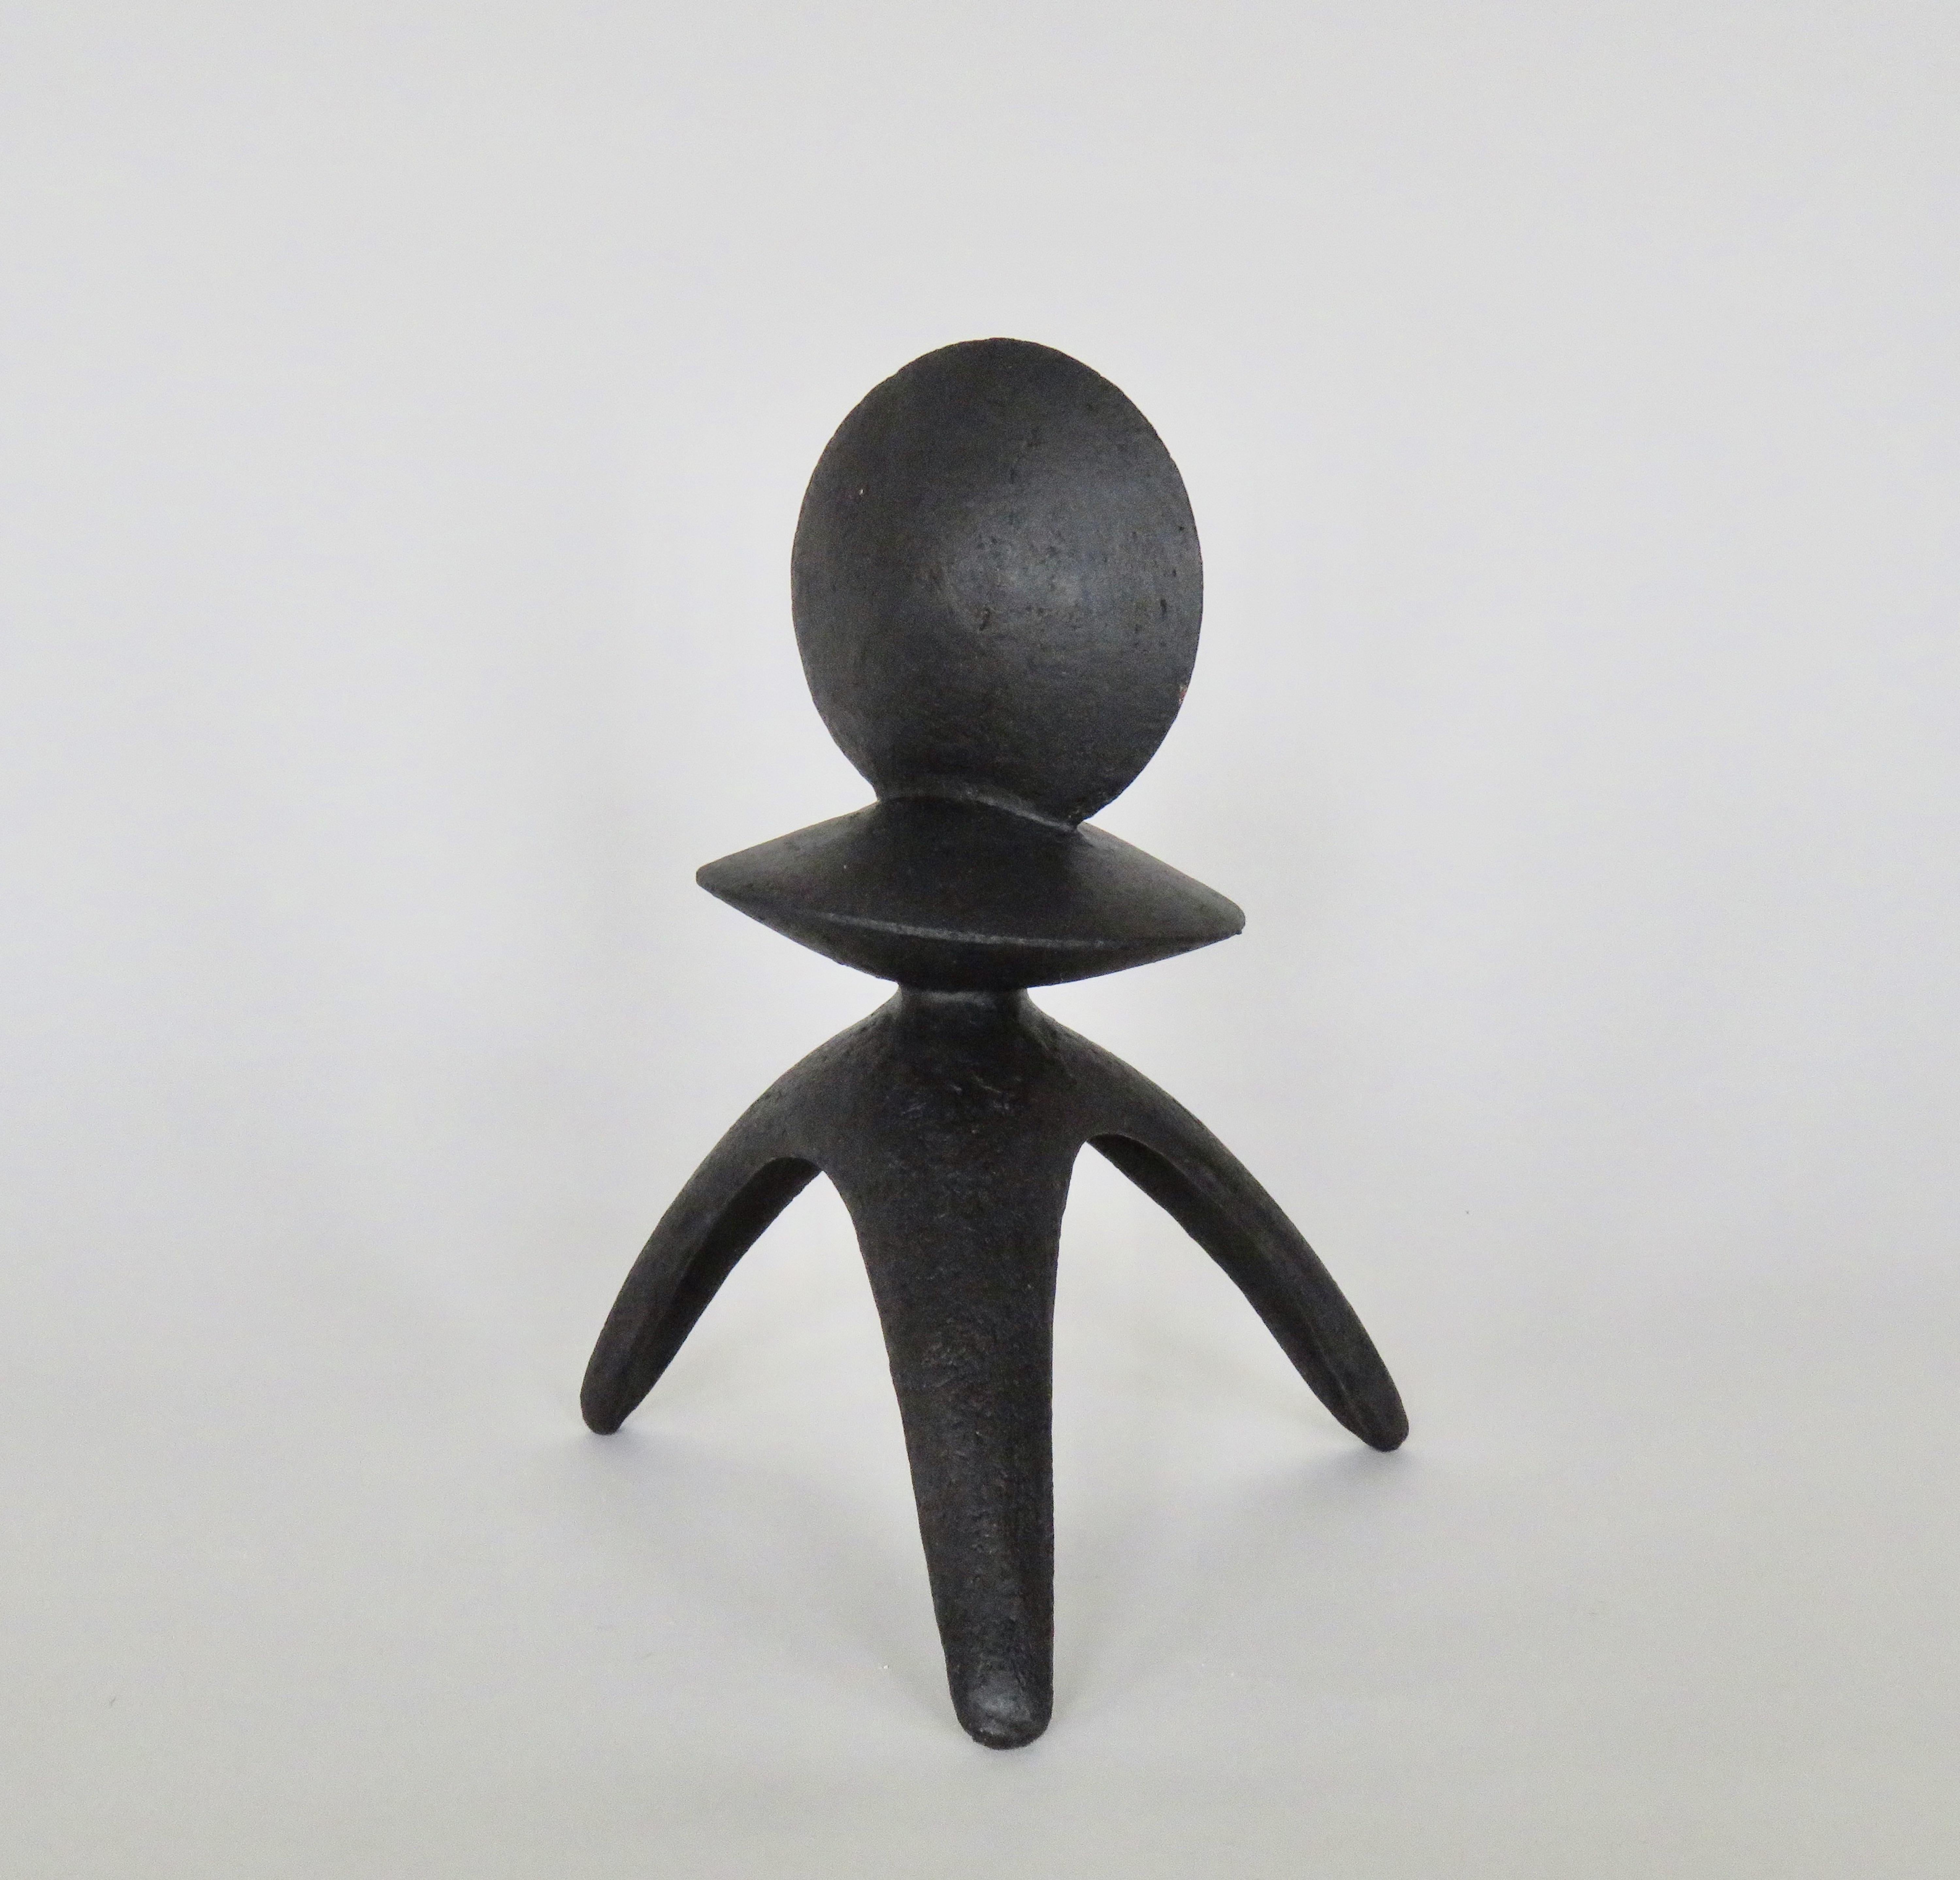 One in a series of fully Hand Built Ceramic TOTEMS in Matte Black Underglazed Stoneware. This one, 